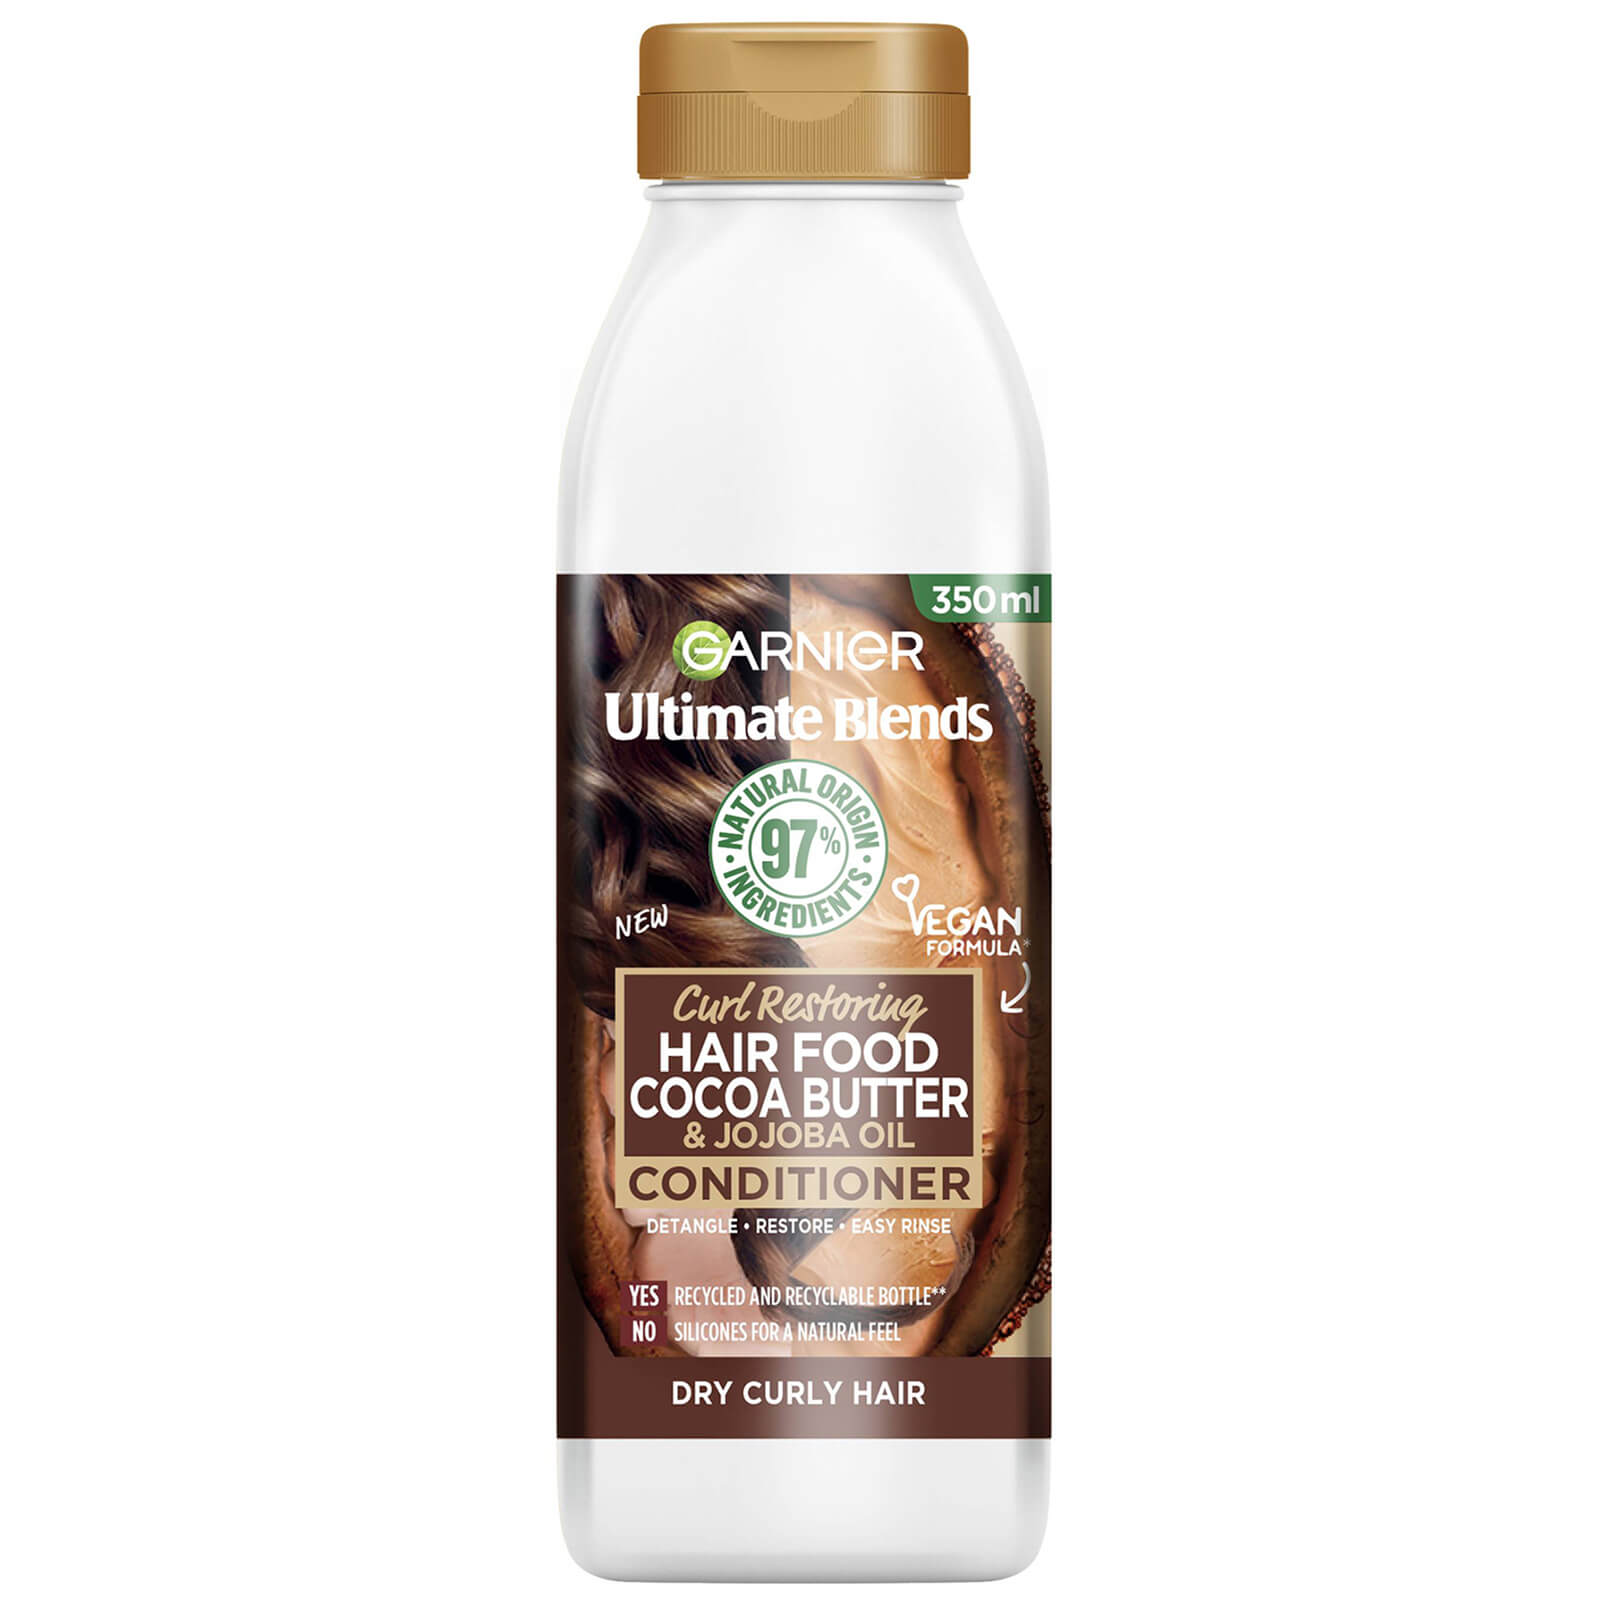 Photos - Hair Product Garnier Ultimate Blends Cocoa Butter Conditioner for Dry, Curly Hair 350ml 